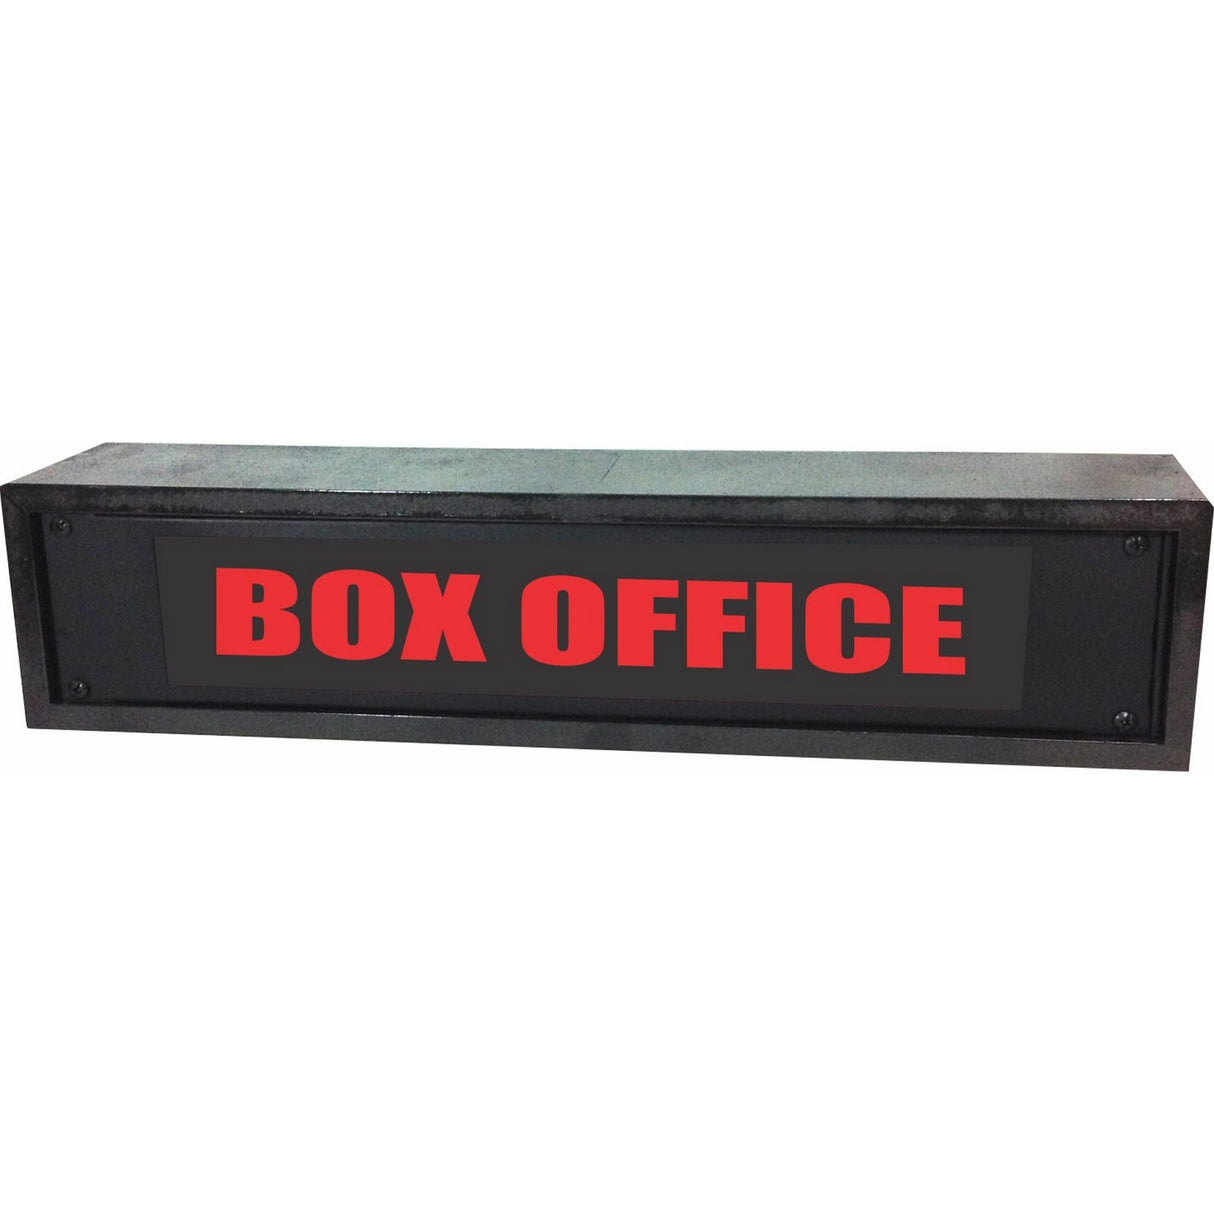 American Recorder OAS-4054RD "BOX OFFICE" 2U Rackmount LED Lighted Sign with Enclosure, Red